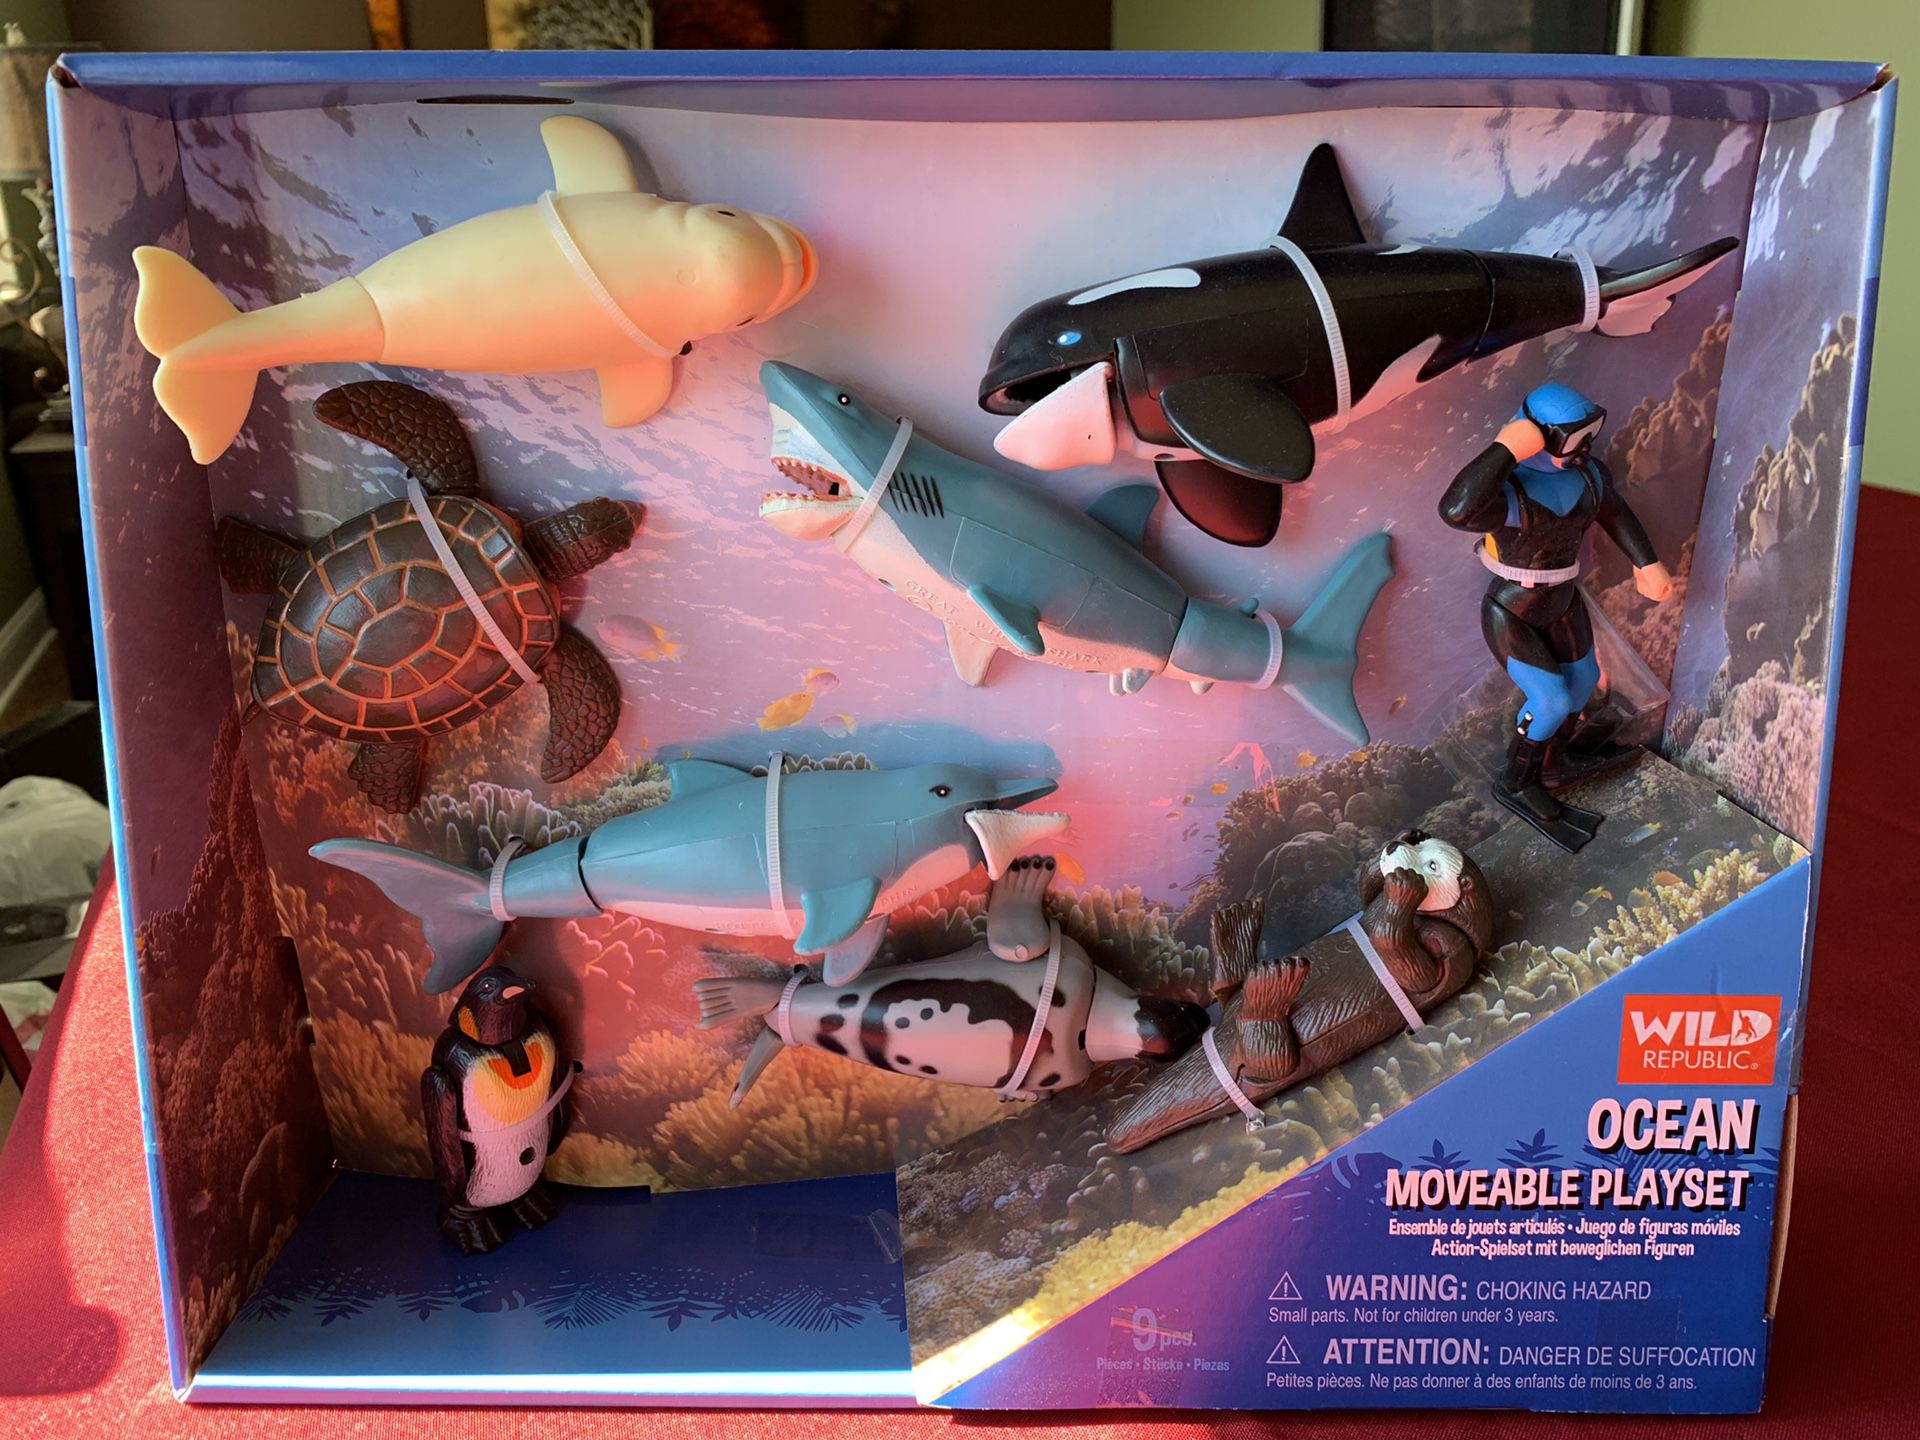 Ocean moveable playset